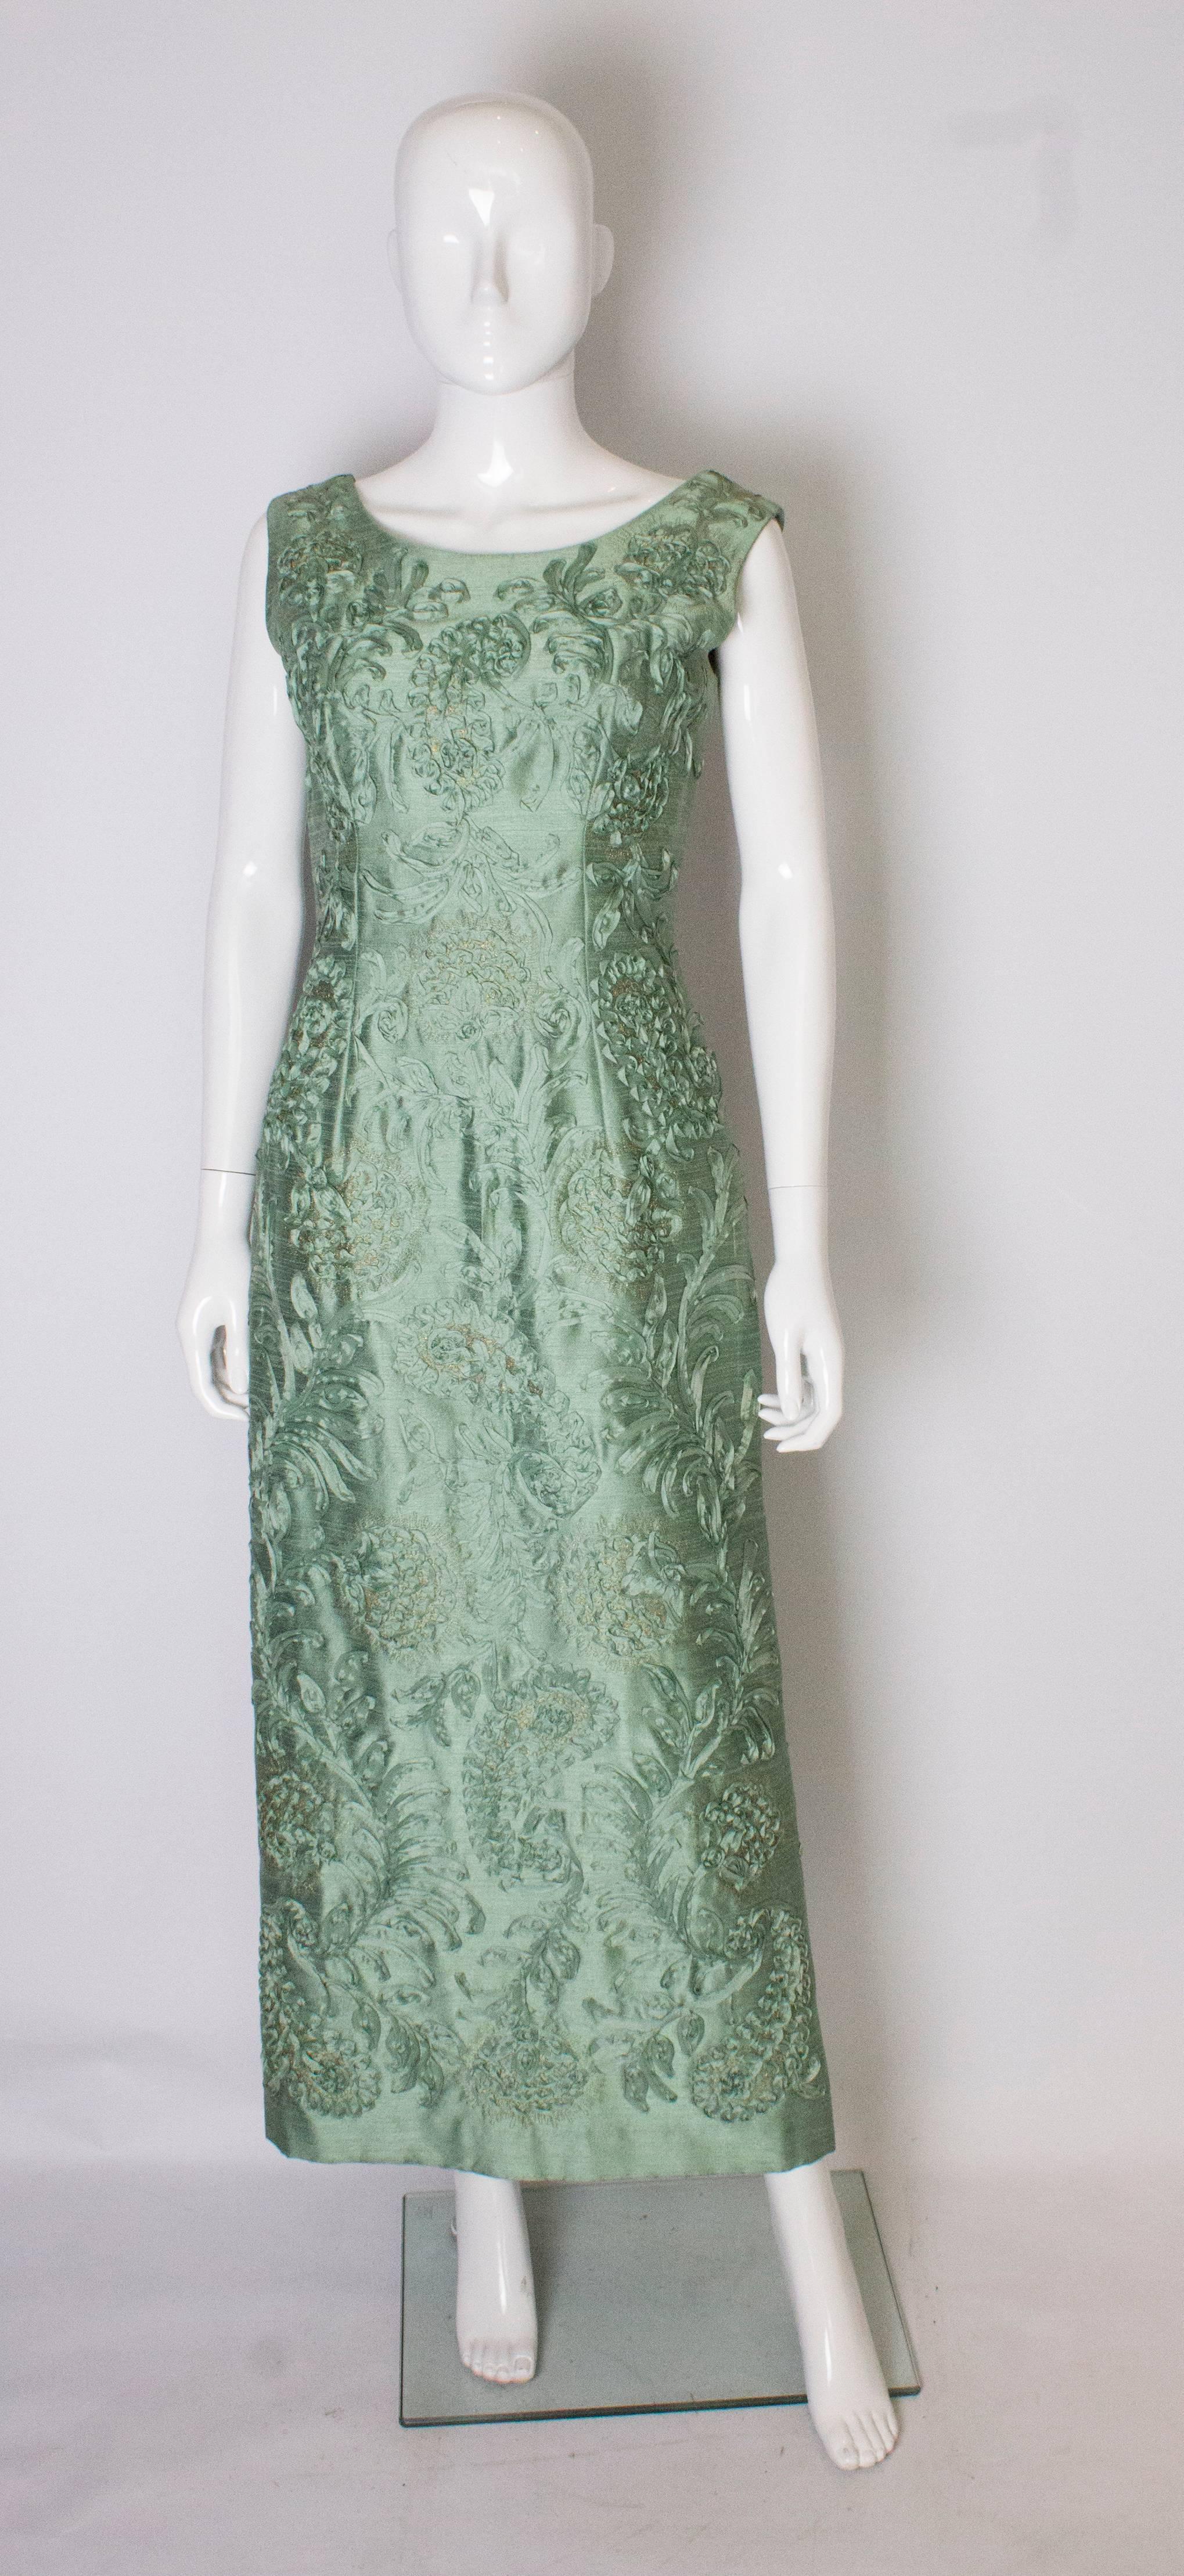 A chic sage green evening gown by Carita Couture . The dress is made of a sage green fabric, speckled with gold and has ribbon decoration.
The dress has a scoop back and front with a  central back zip, and a 15'' slit at the back.